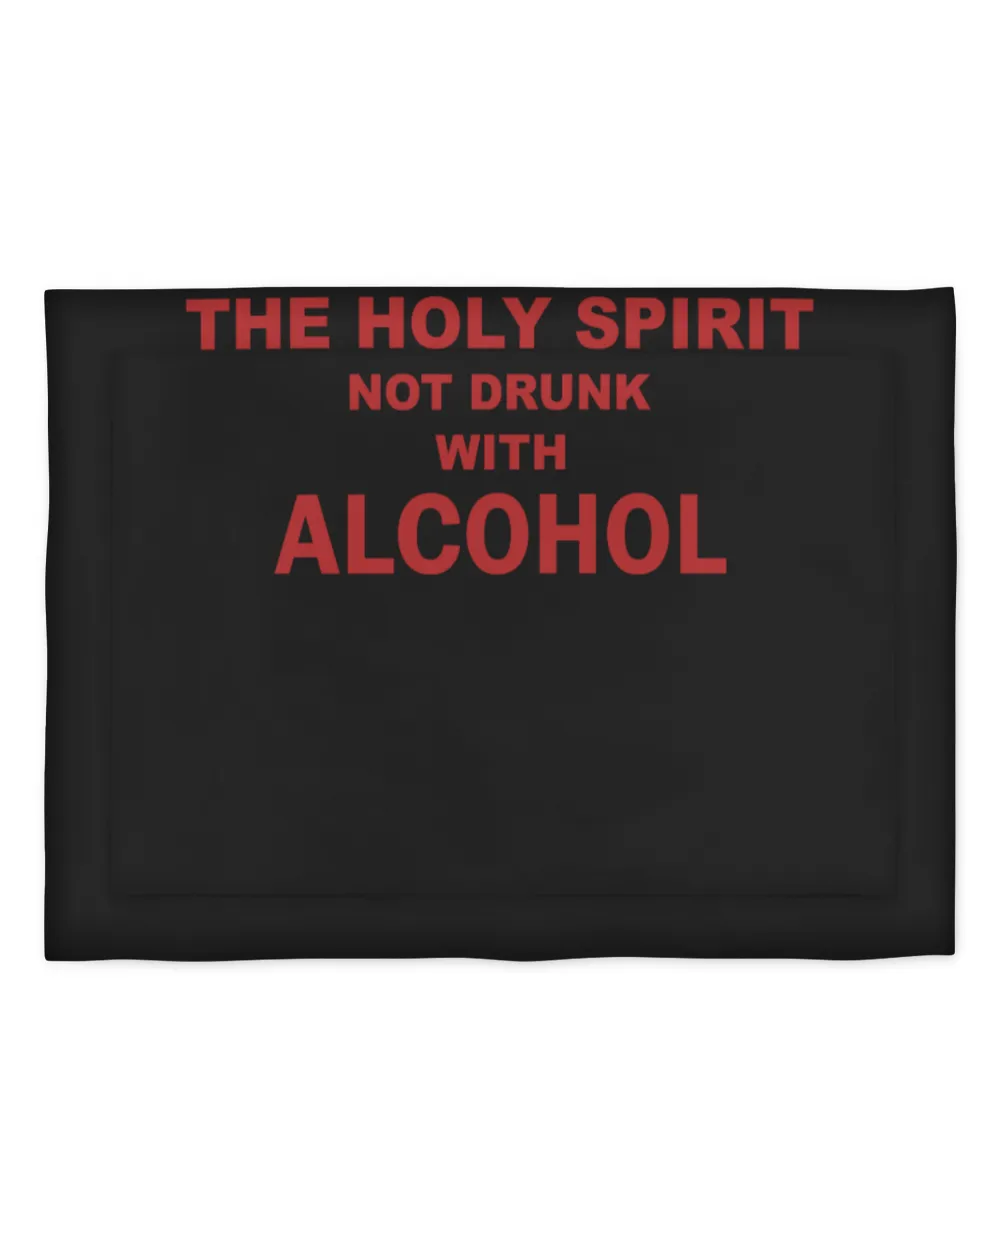 Be Filled With The Holy Spirit Not Drunk With Alcohol Shirt